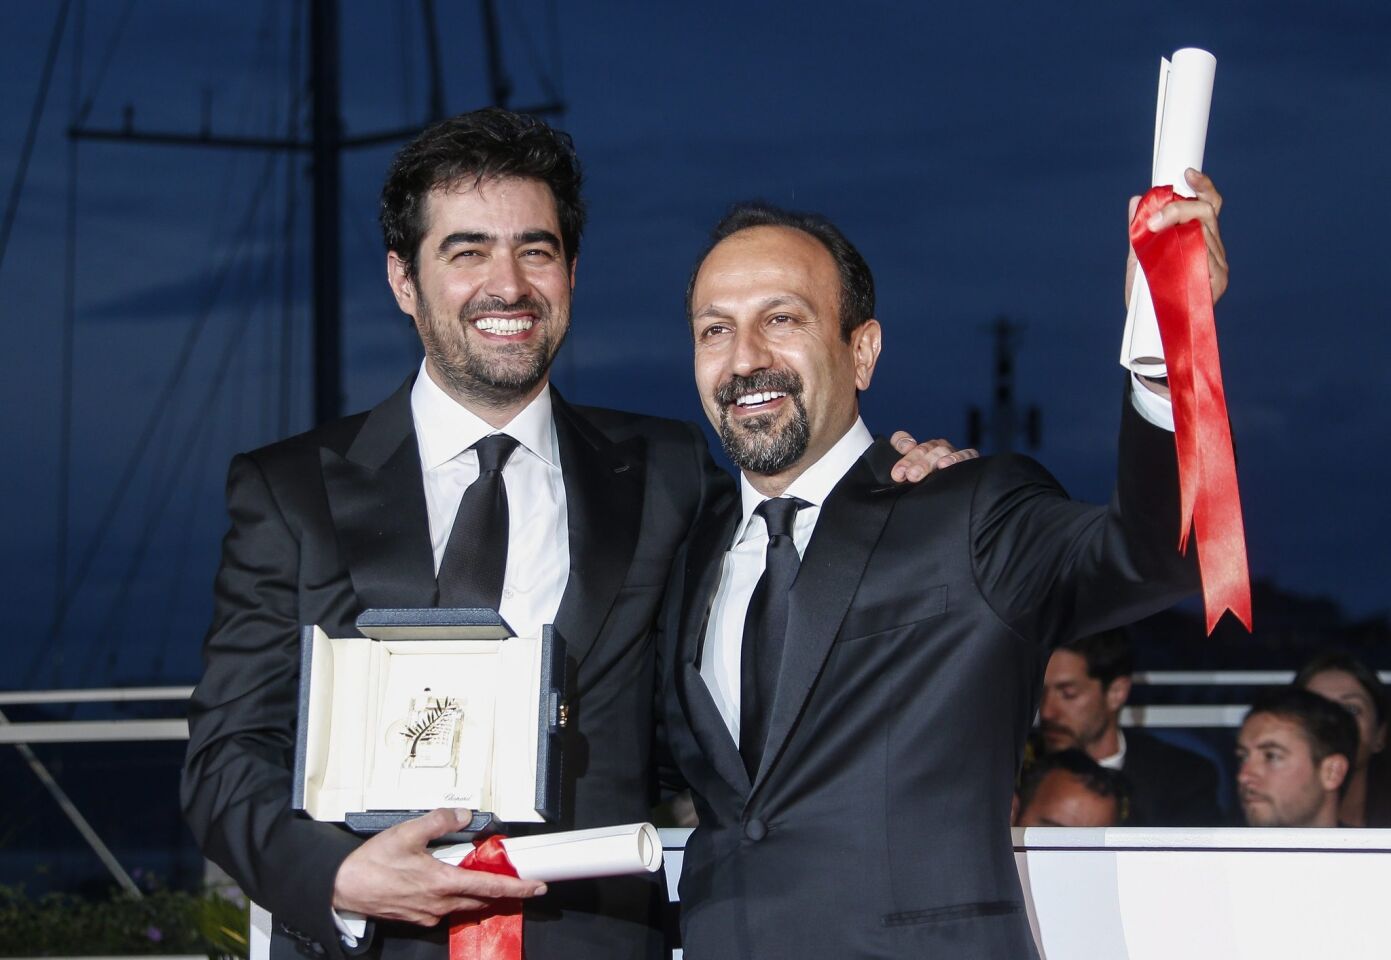 Iranian director Ashgar Farhadi, right, and Iranian actor Shahab Hosseini pose during the award winners photo call after they won the Best Screenplay award and the Best Performance by an Actor award for the movie "Forushande" ("The Salesman").